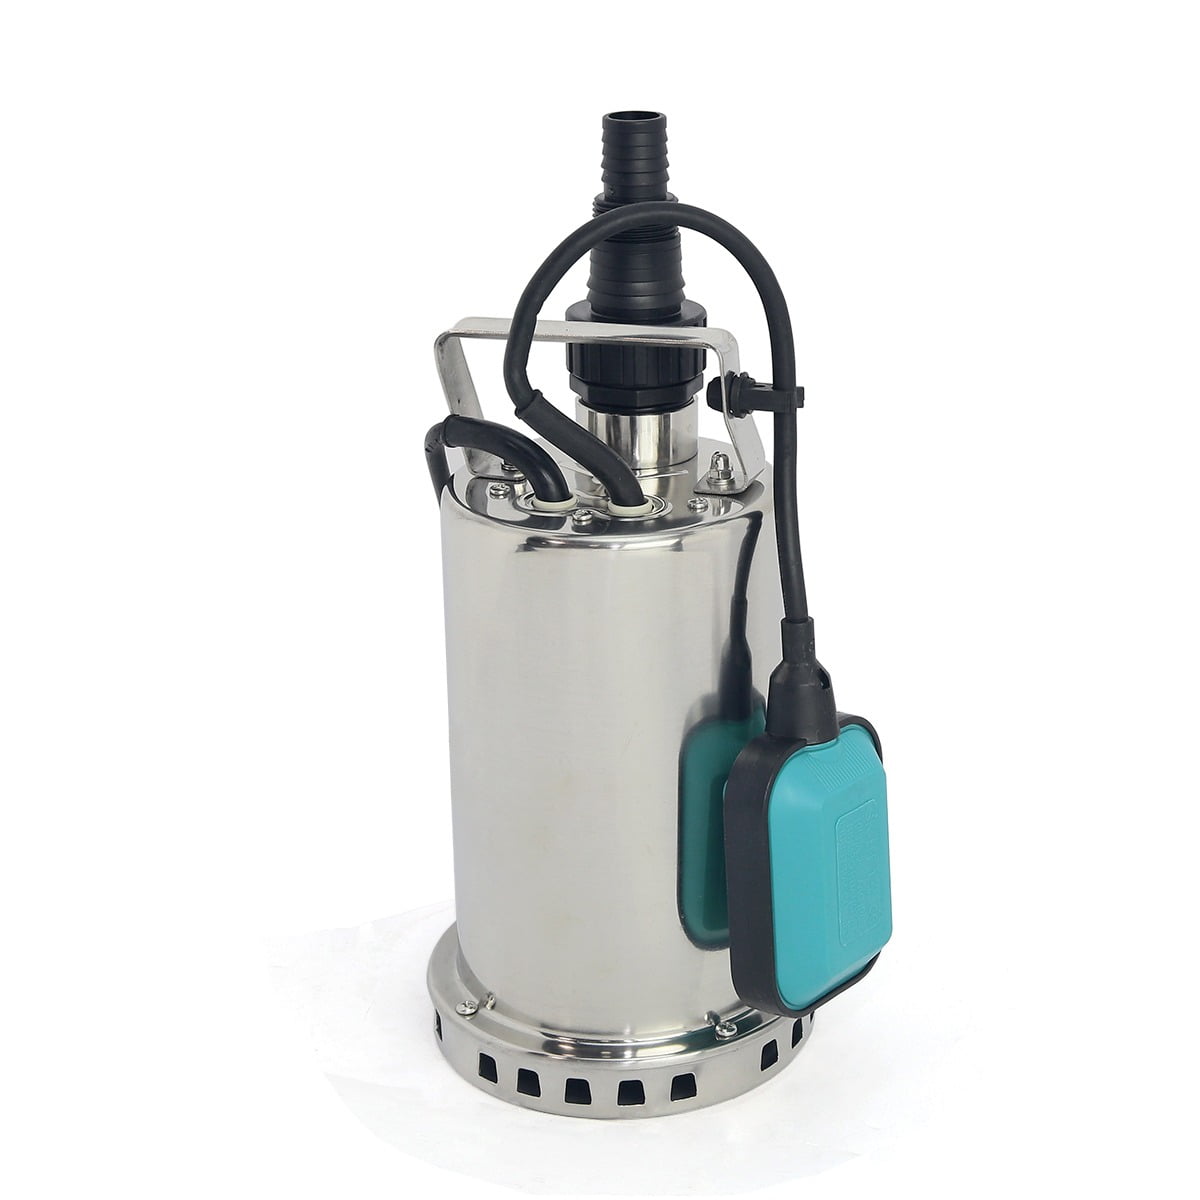 Details about   1HP Electric Submersible Water Pump Sump with Float Switch Portable B t s e 166 